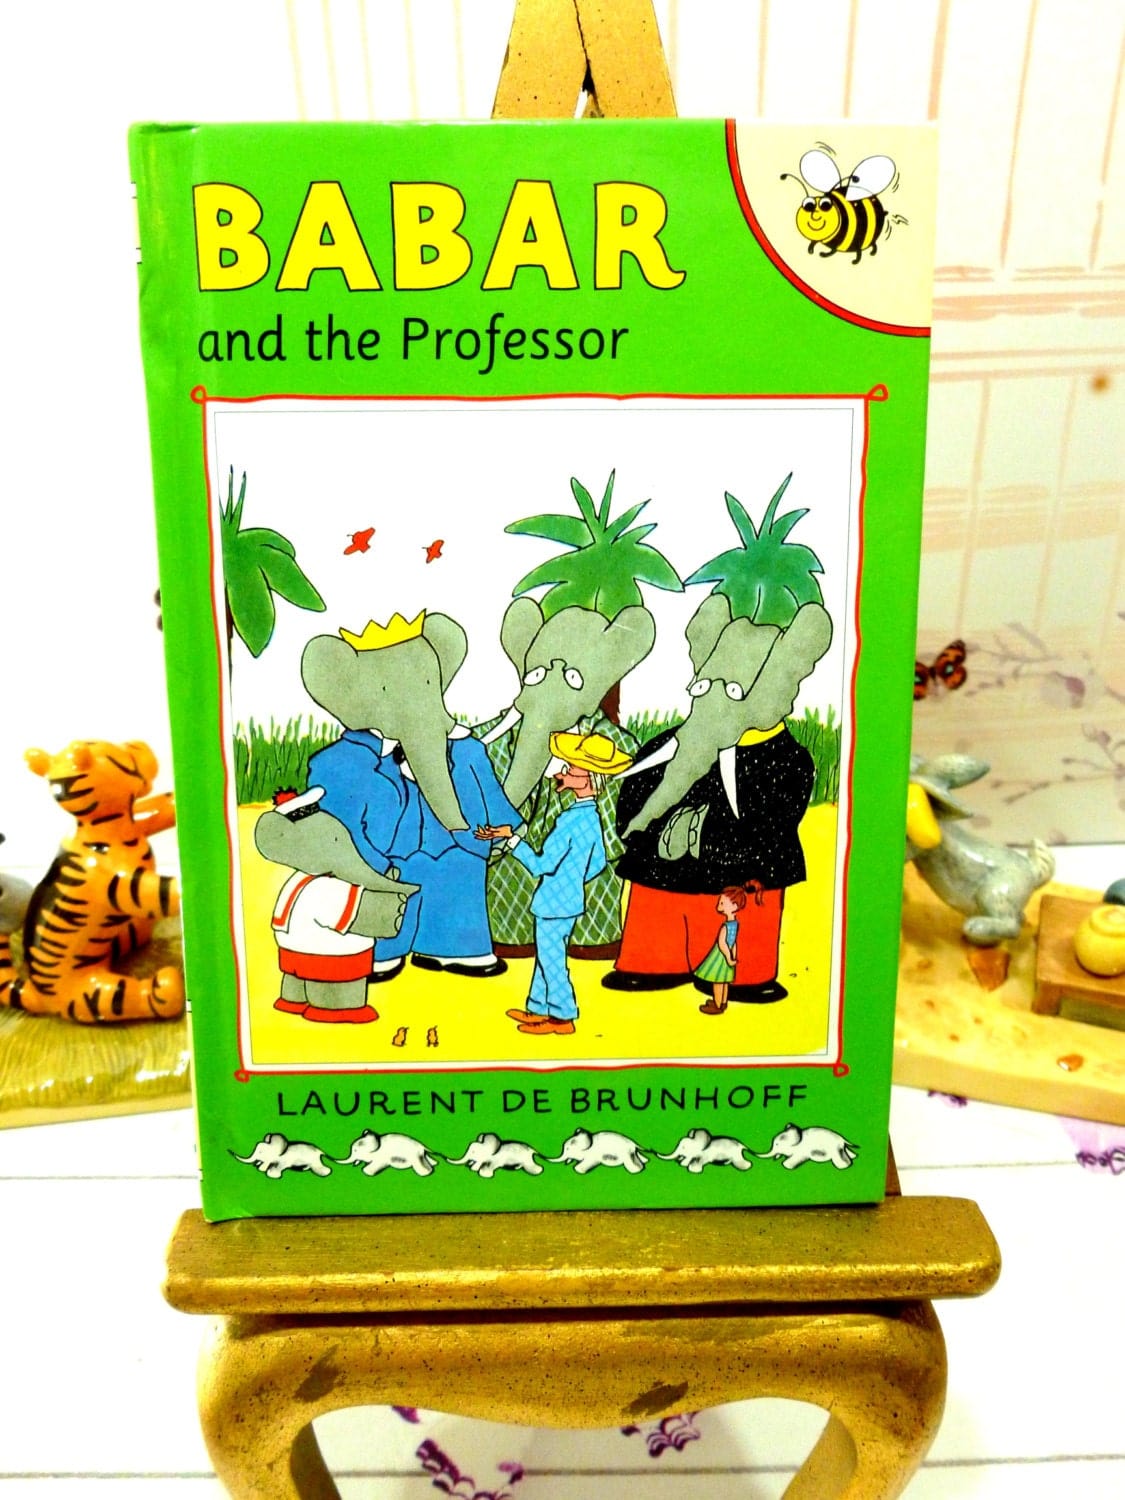 Babar and the Professor by Laurent De Brunhoff Ladybird Sized Story Book 1993